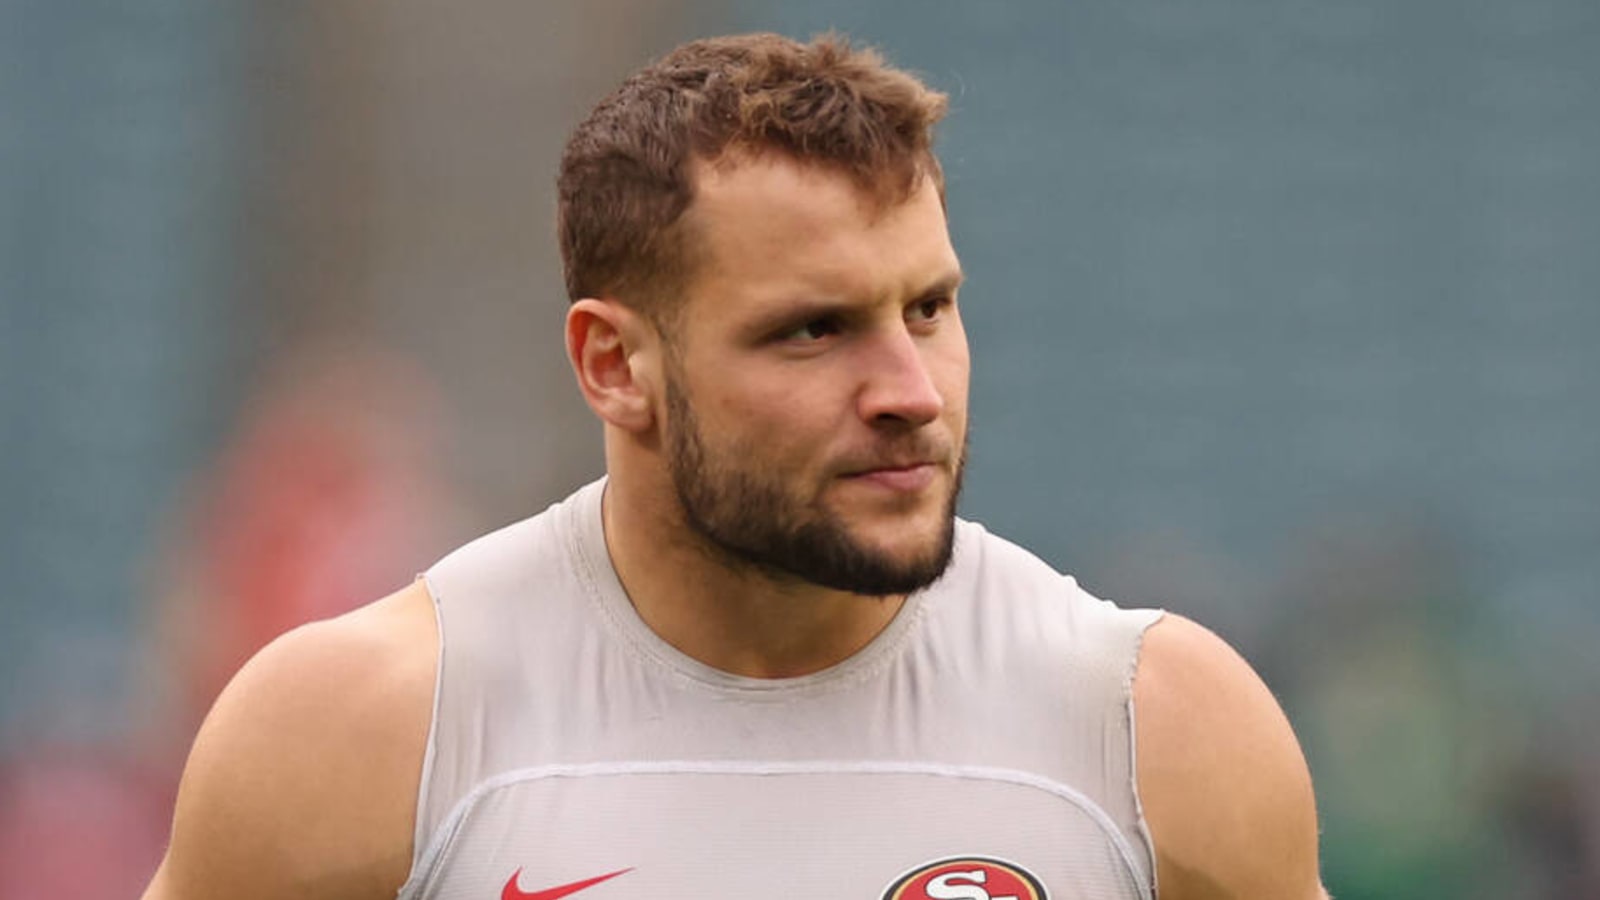 49ers star Nick Bosa has a burst fueled by sweat, sacrifice and a